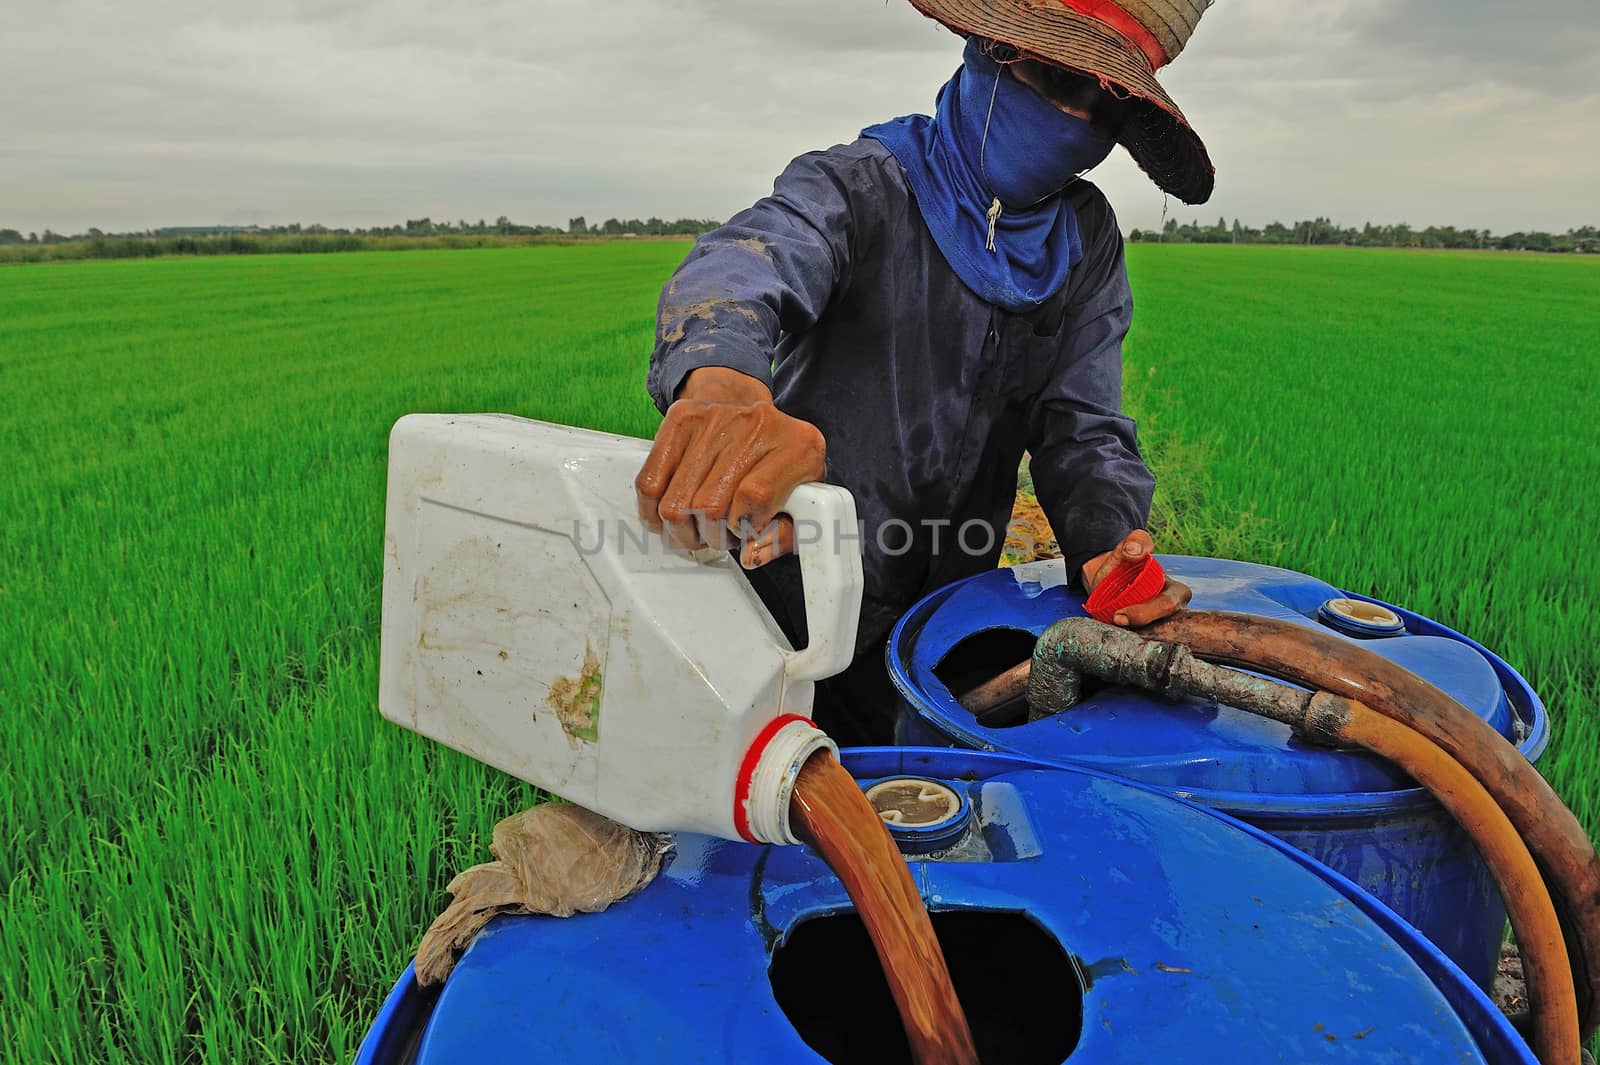 farmer mixing pesticide on the rice field by think4photop